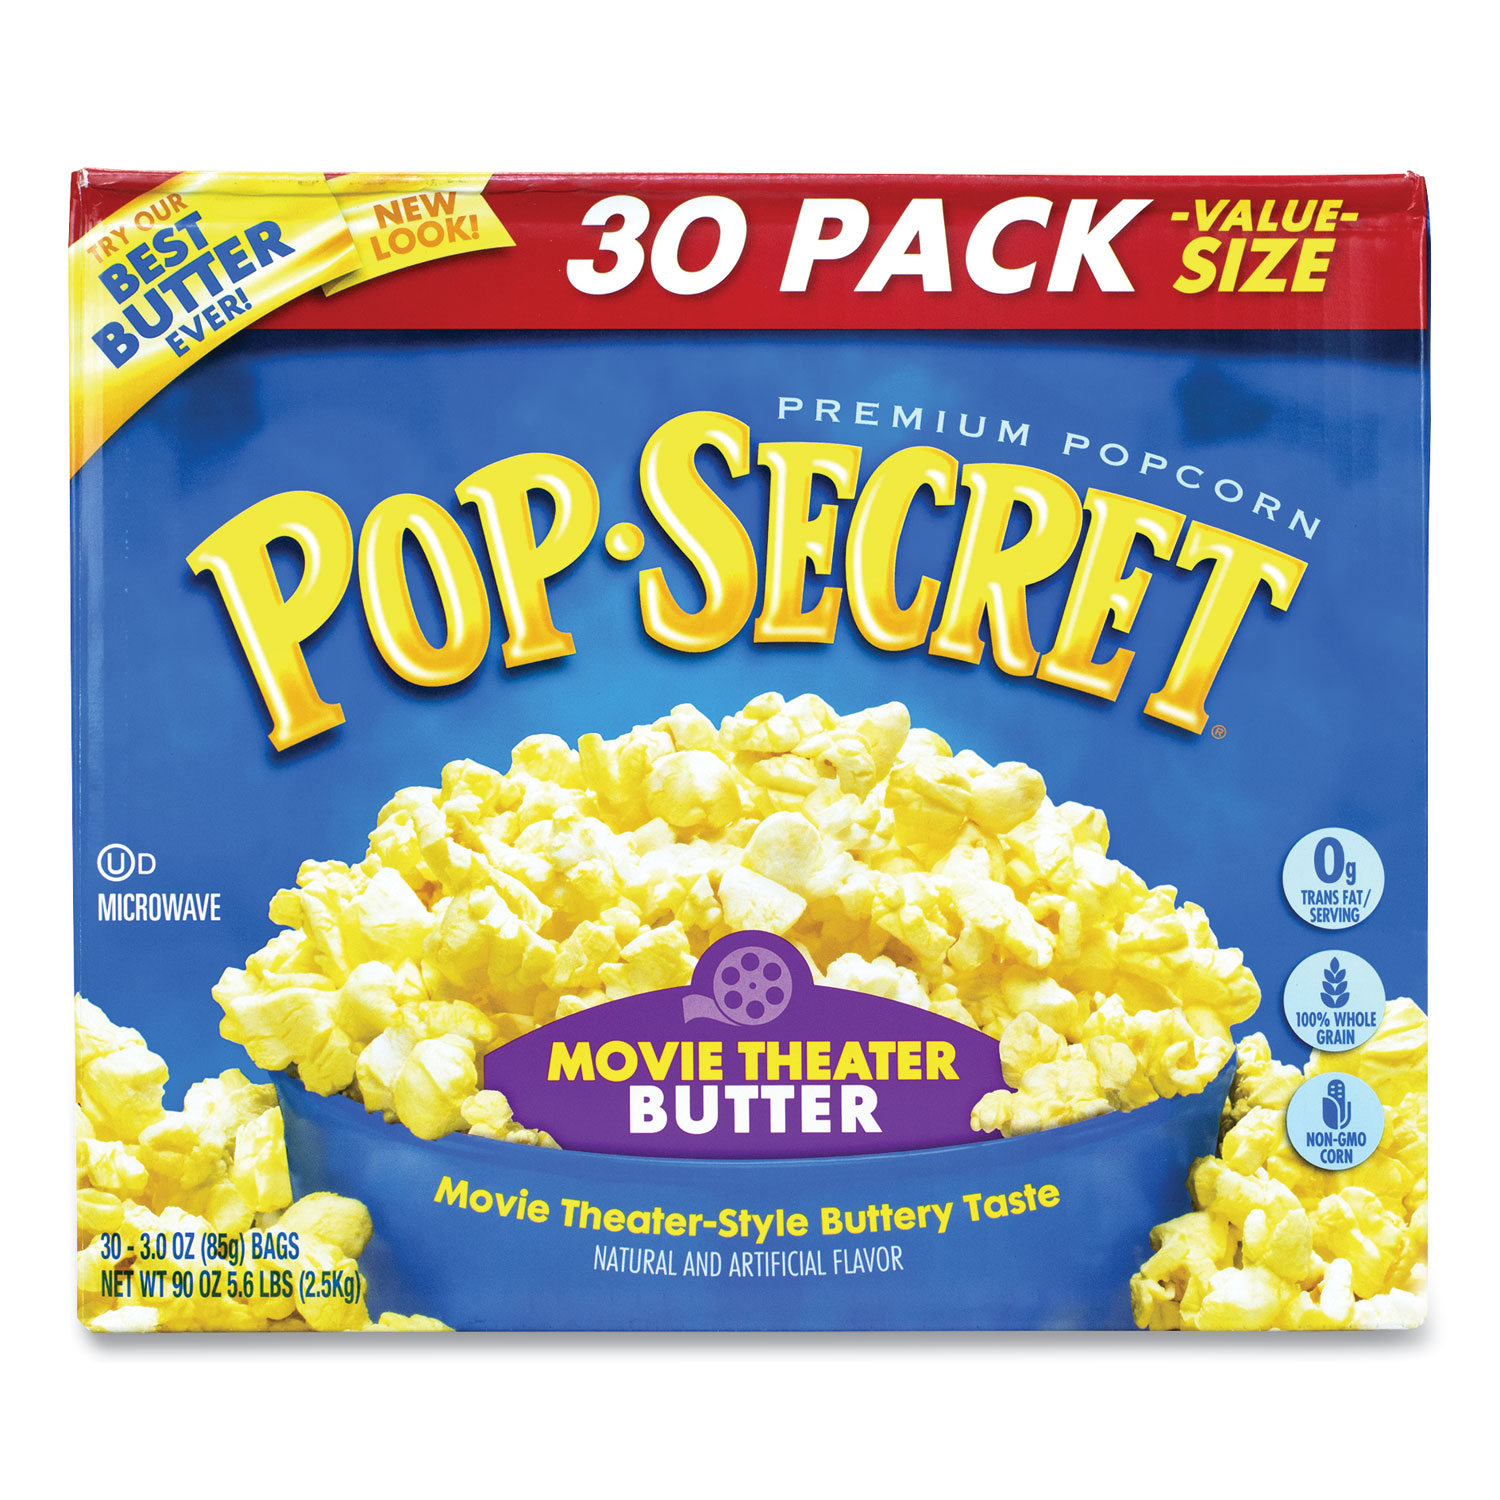  Pop Secret 69687 Microwave Popcorn, Movie Theater Butter, 3 oz Bags, 30/Carton, Free Delivery in 1-4 Business Days (GRR22000633) 